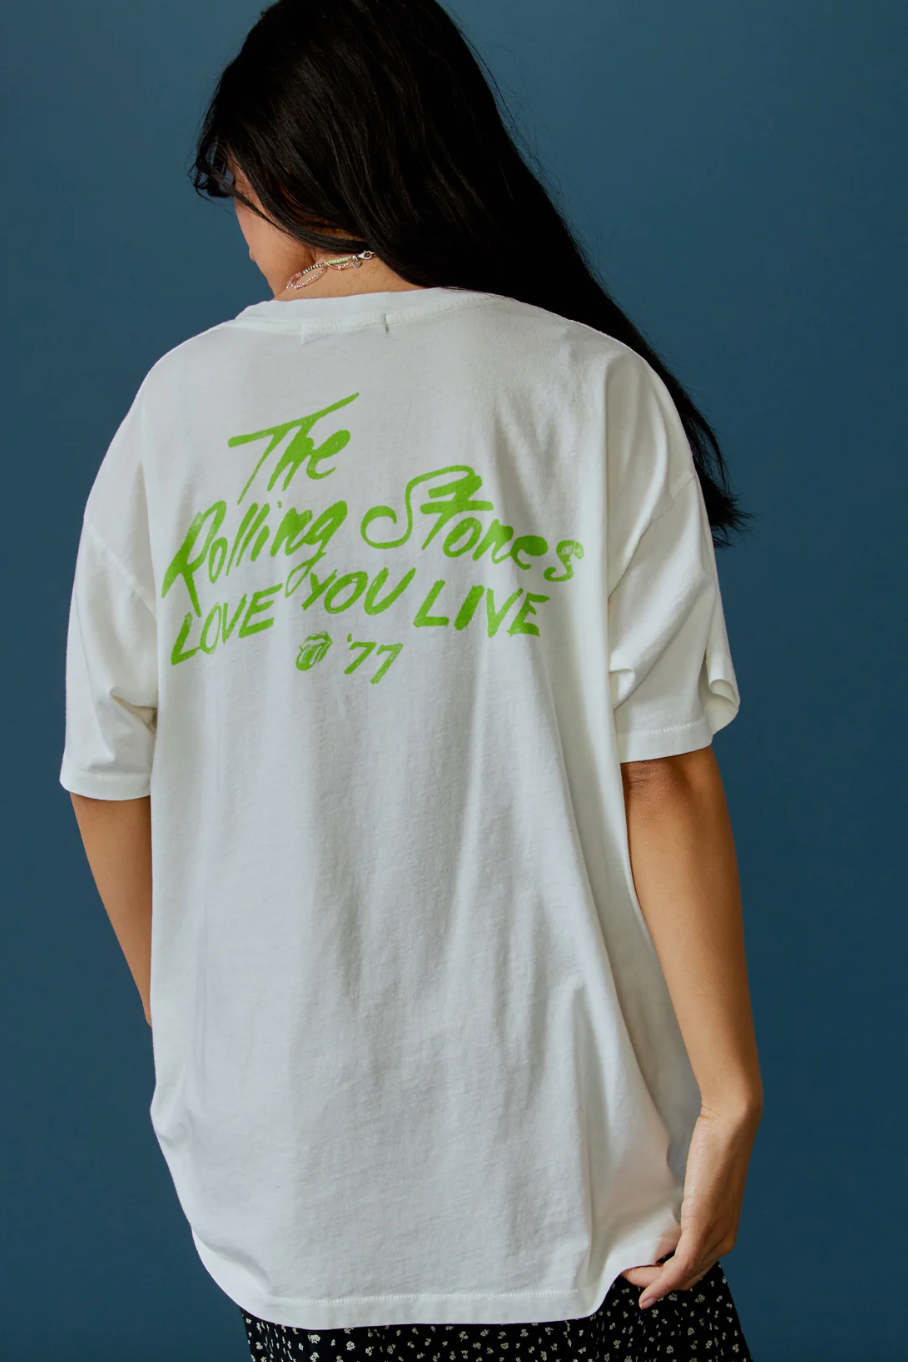 rolling stones love you live '77 merch tee